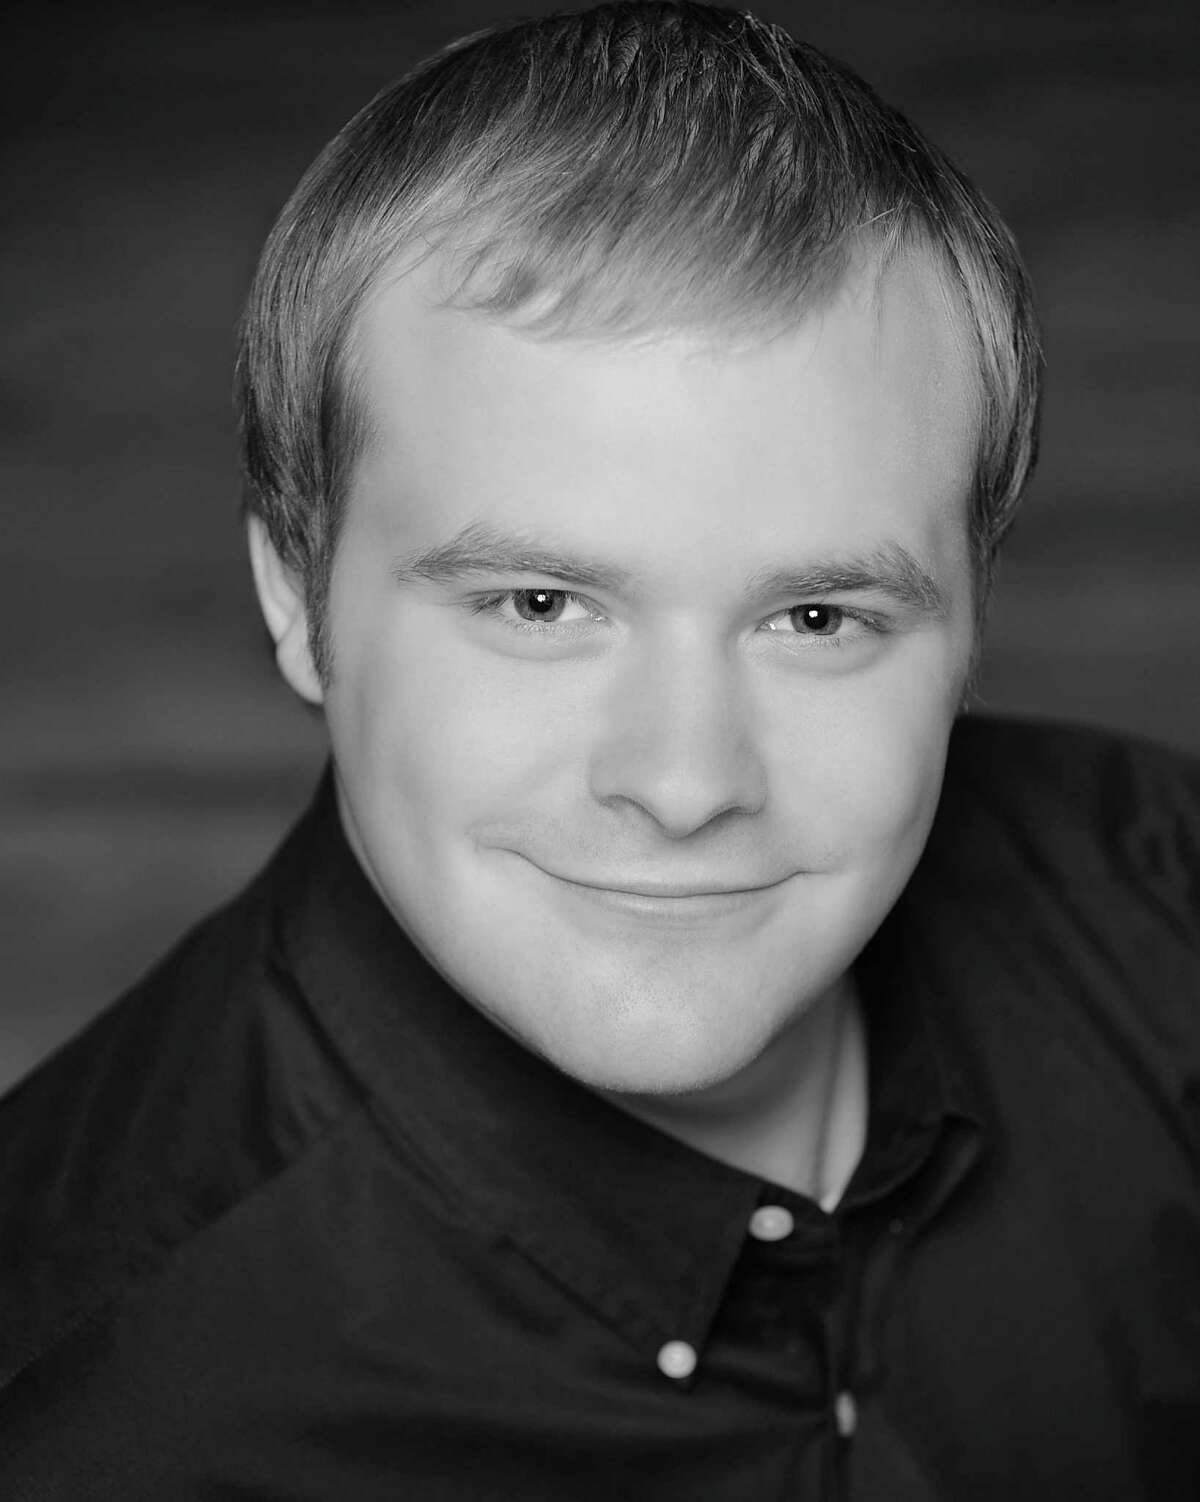 Thomas Richards won first prize in Houston Grand Opera's annual Eleanor McCollum Competition for Young Singers.